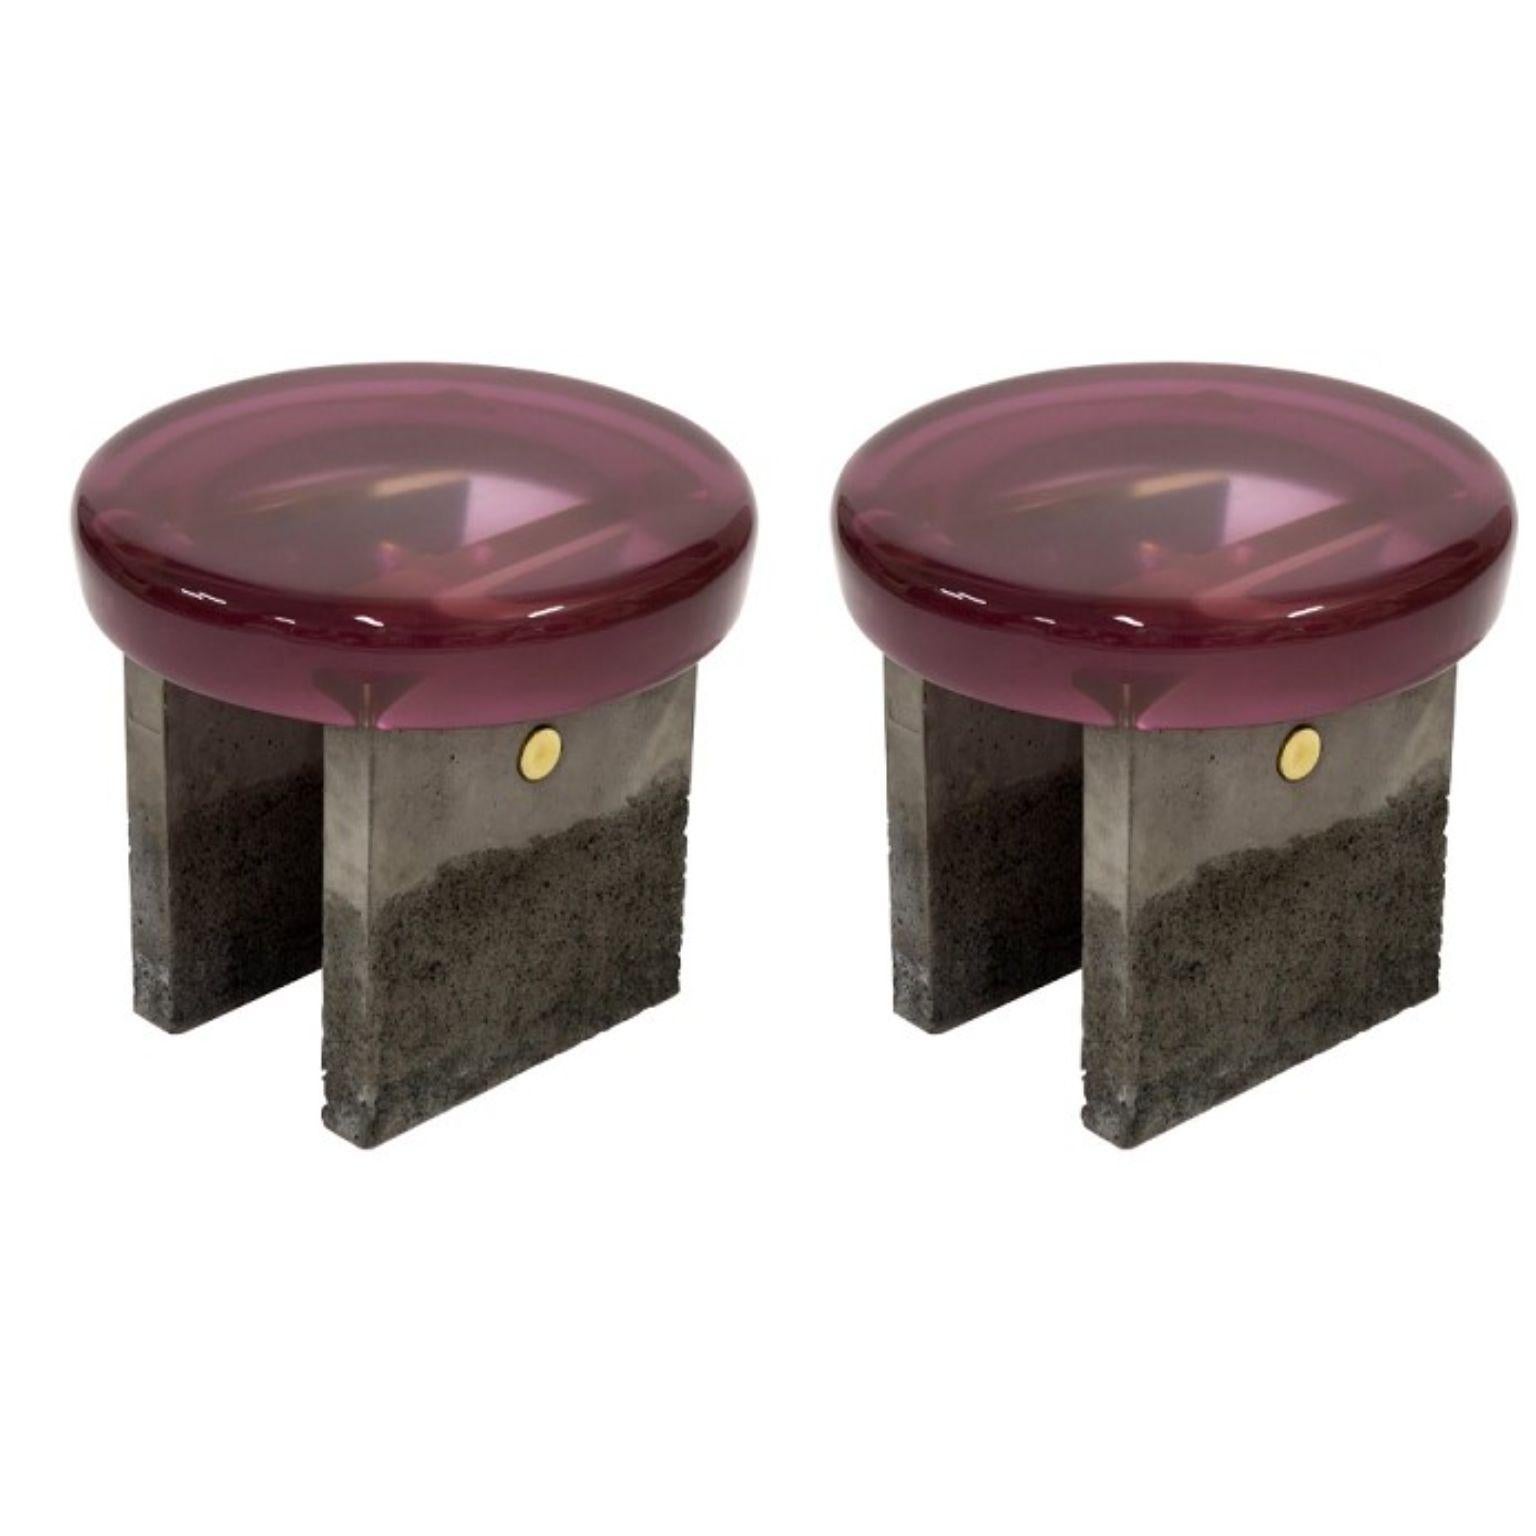 Set of 2 Golia stools by Draga & Aurel.
Dimensions: W 50, D 50, H 45, top Ø 50 cm.
Materials: resin and concrete.

Customized colors needs can be considered.

The Golia stools are featured by sculptural, almost monumental forms, and by an